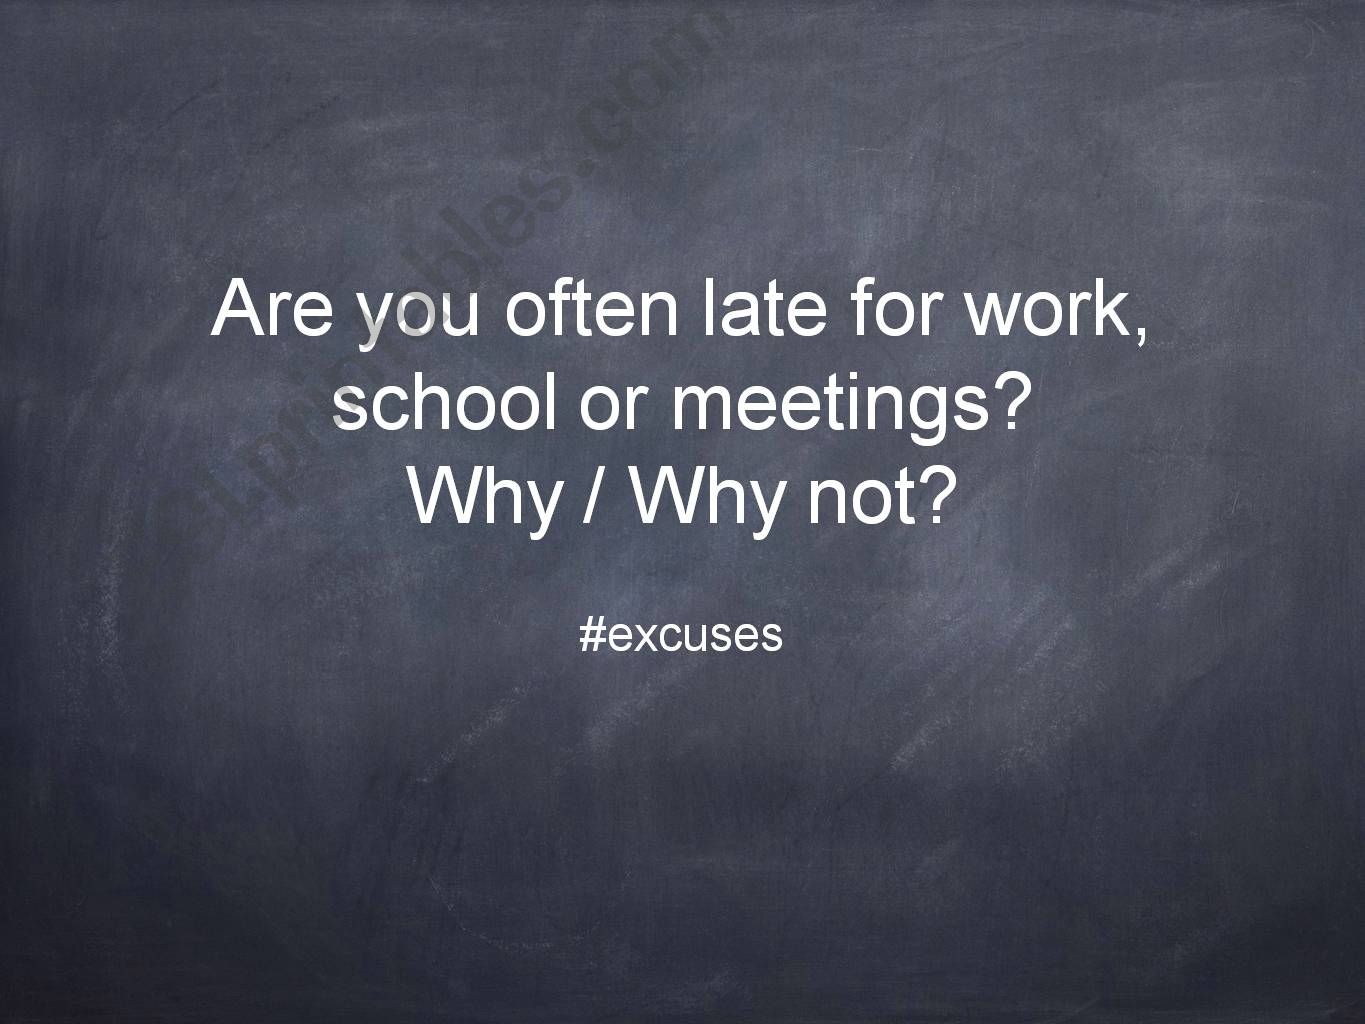 Excuses : be late powerpoint